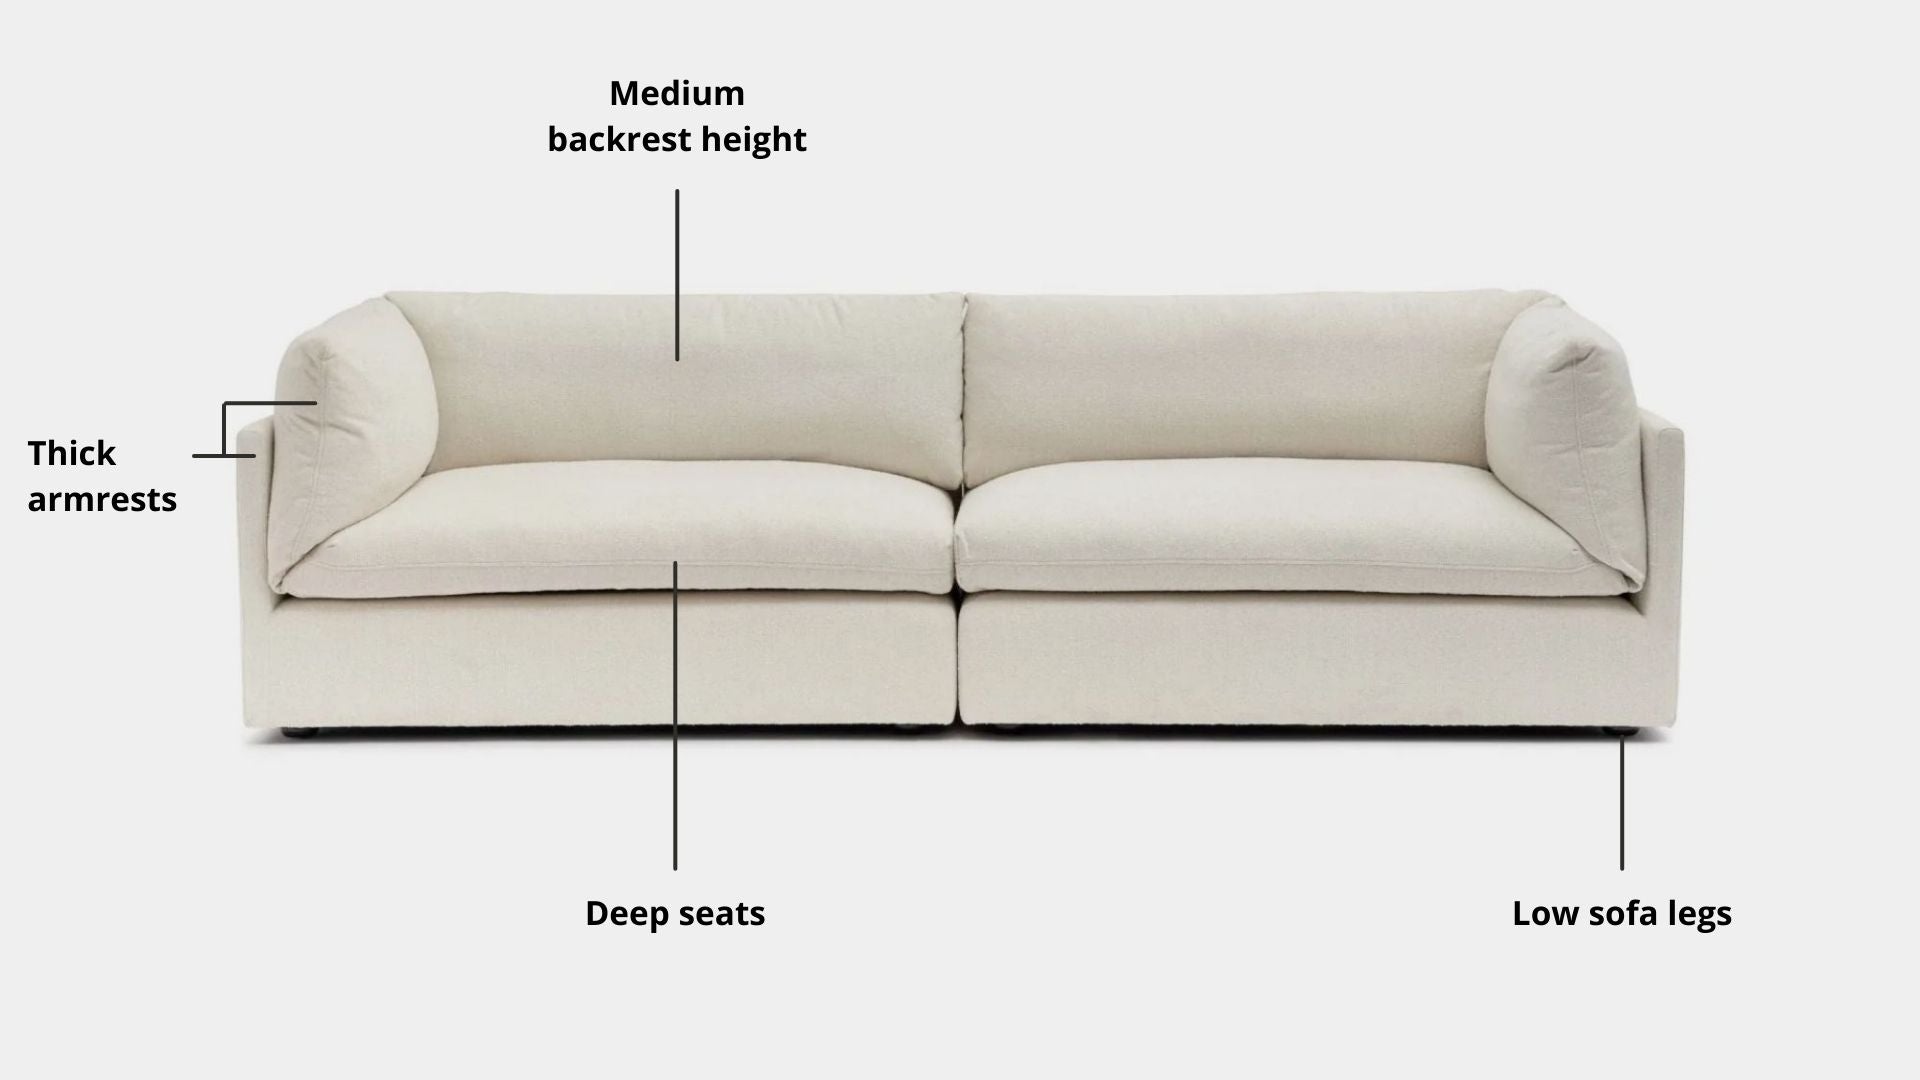 Key features such as armrest thickness, cushion height, seat depth and sofa leg height for Clara Fabric Sofa